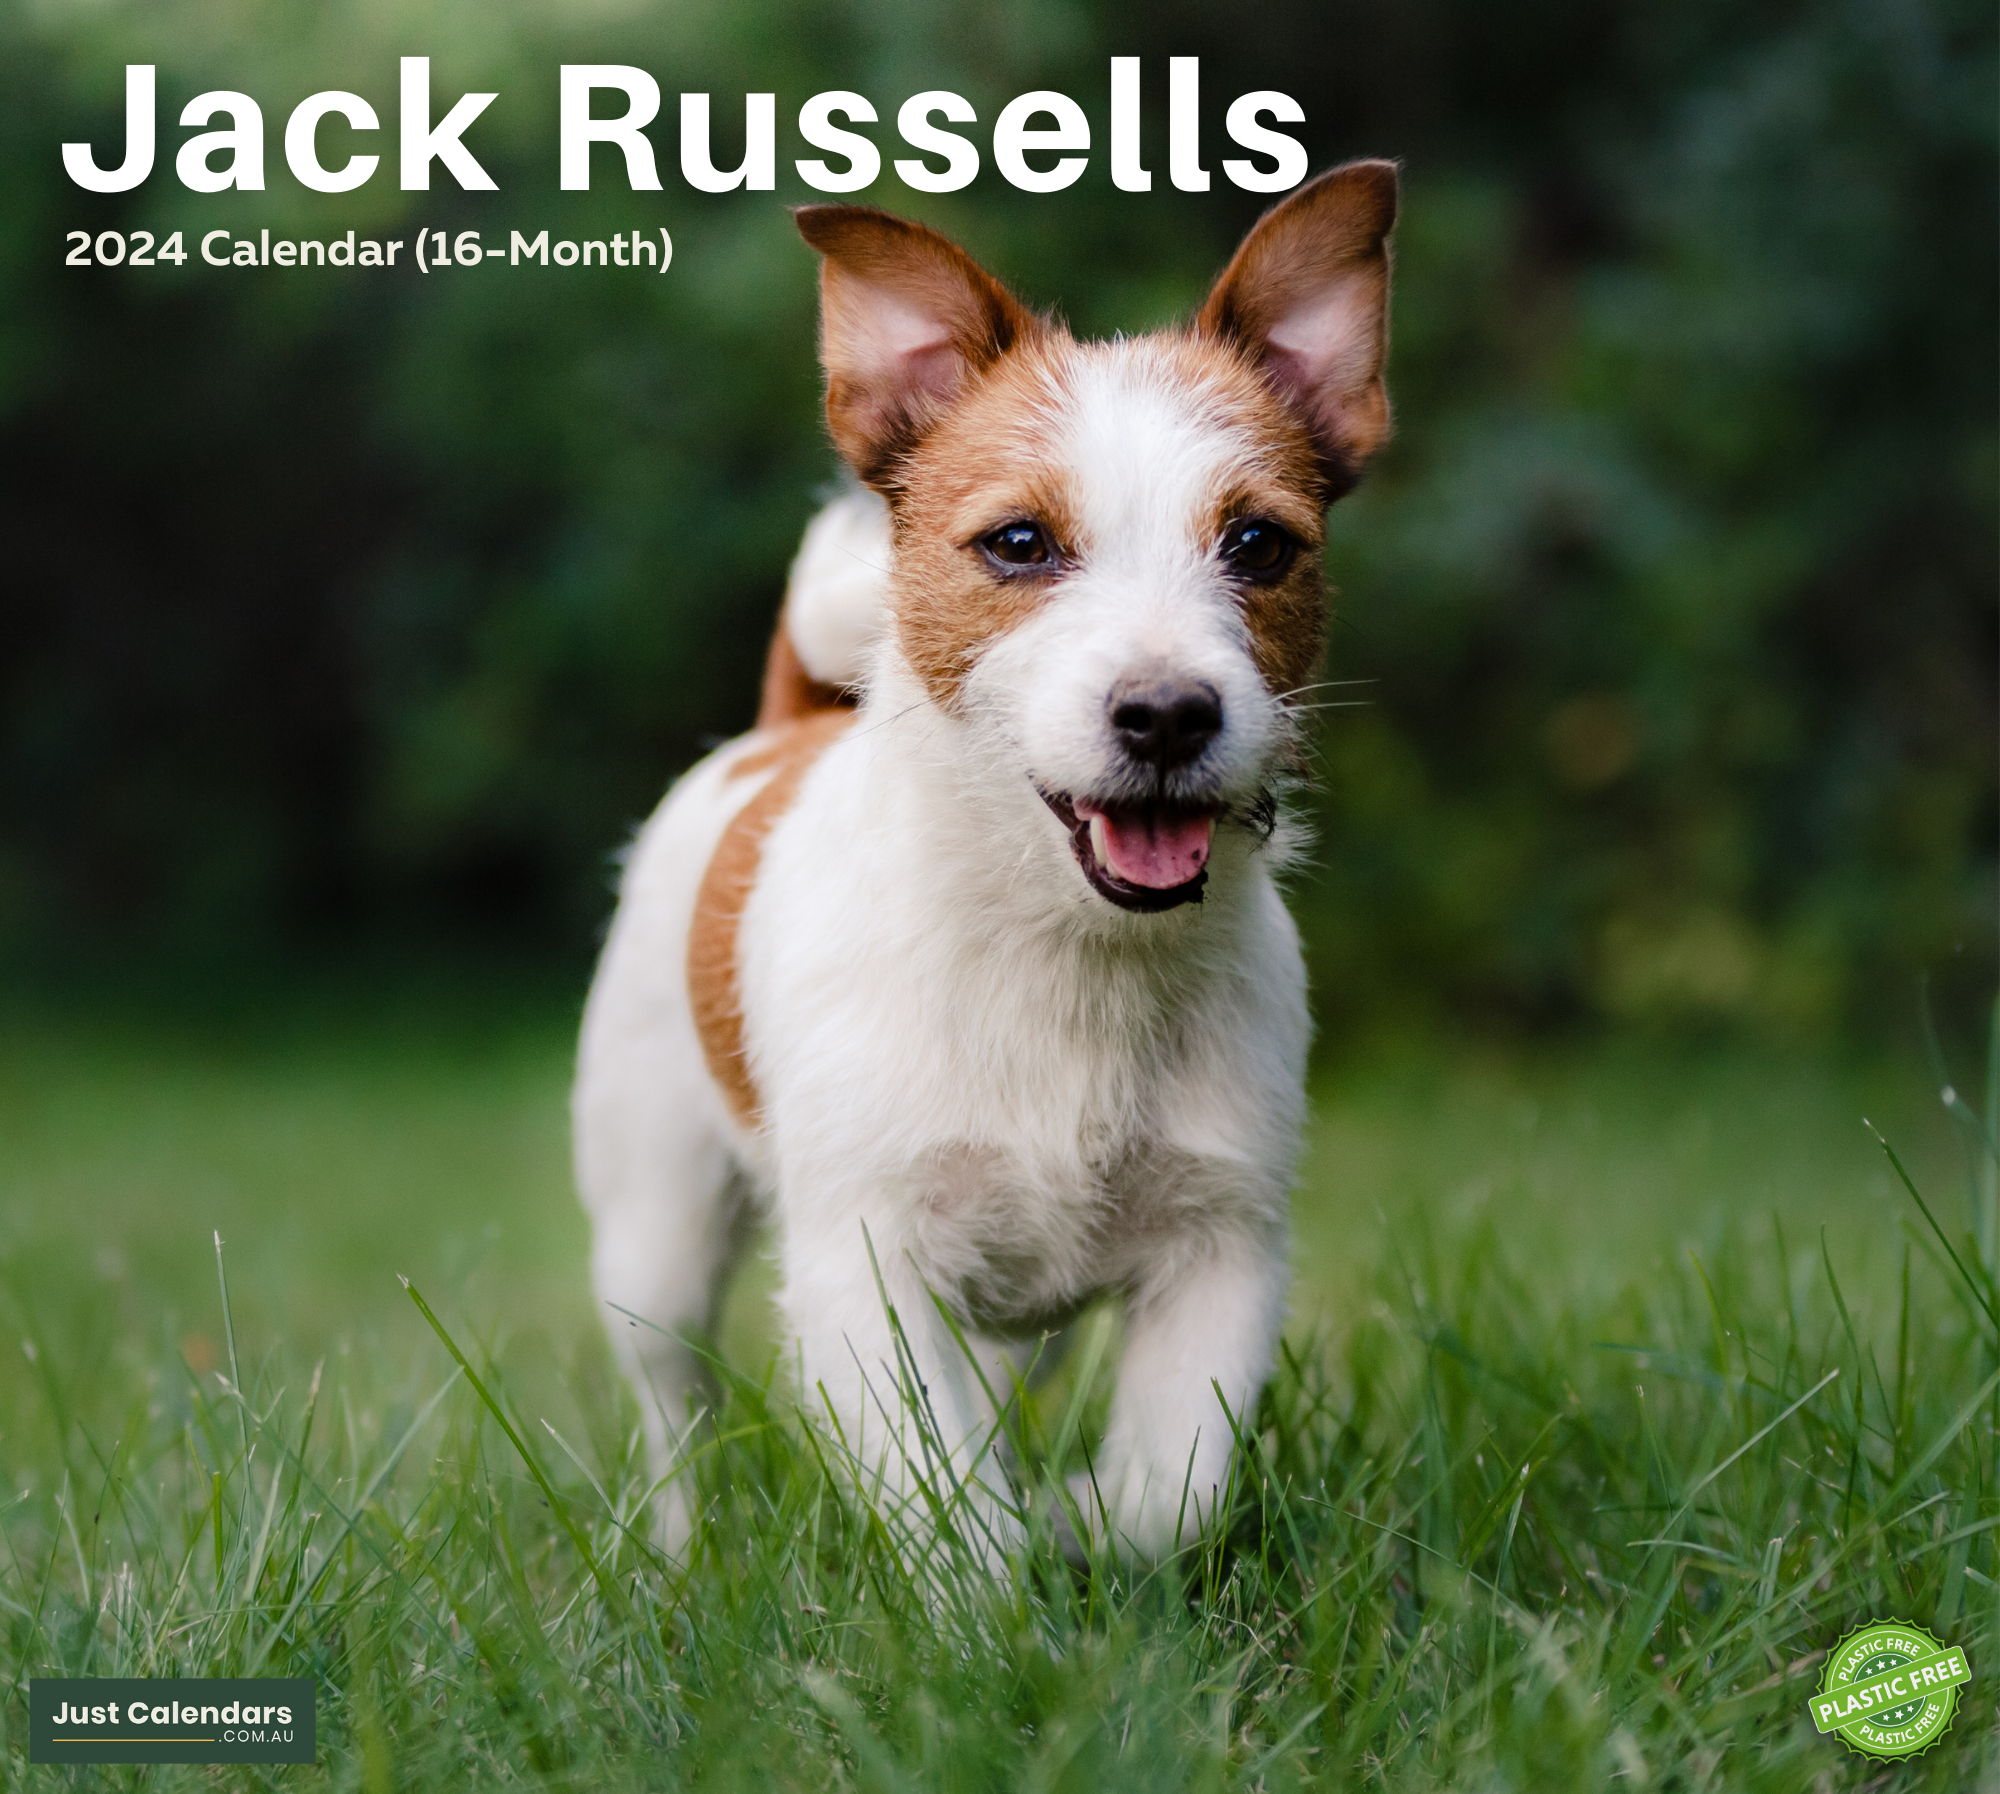 2024 Jack Russells Dogs & Puppies - Deluxe Wall Calendar by Just Calendars - 16 Month - Plastic Free